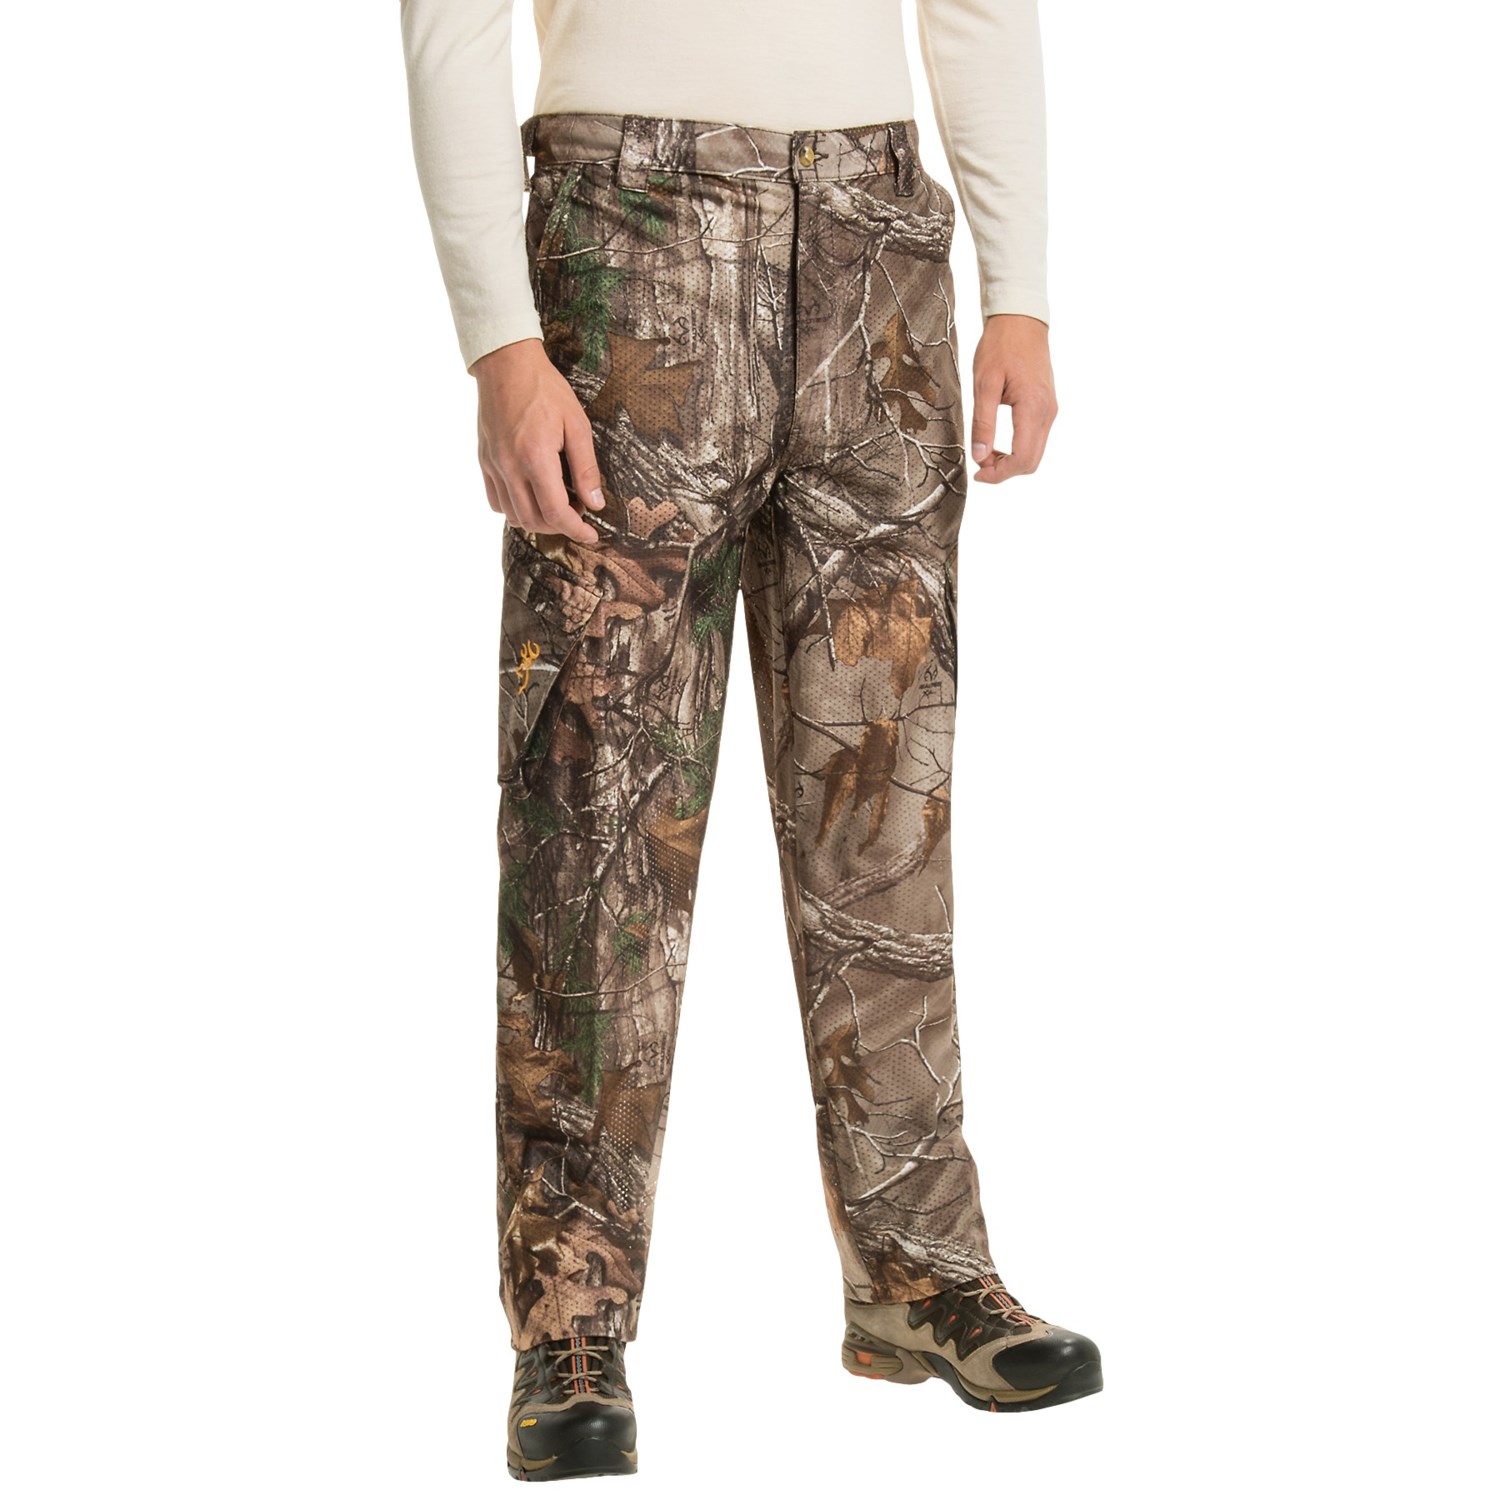 Browning Wasatch Mesh Lite Pants (For Men) - Save 50%